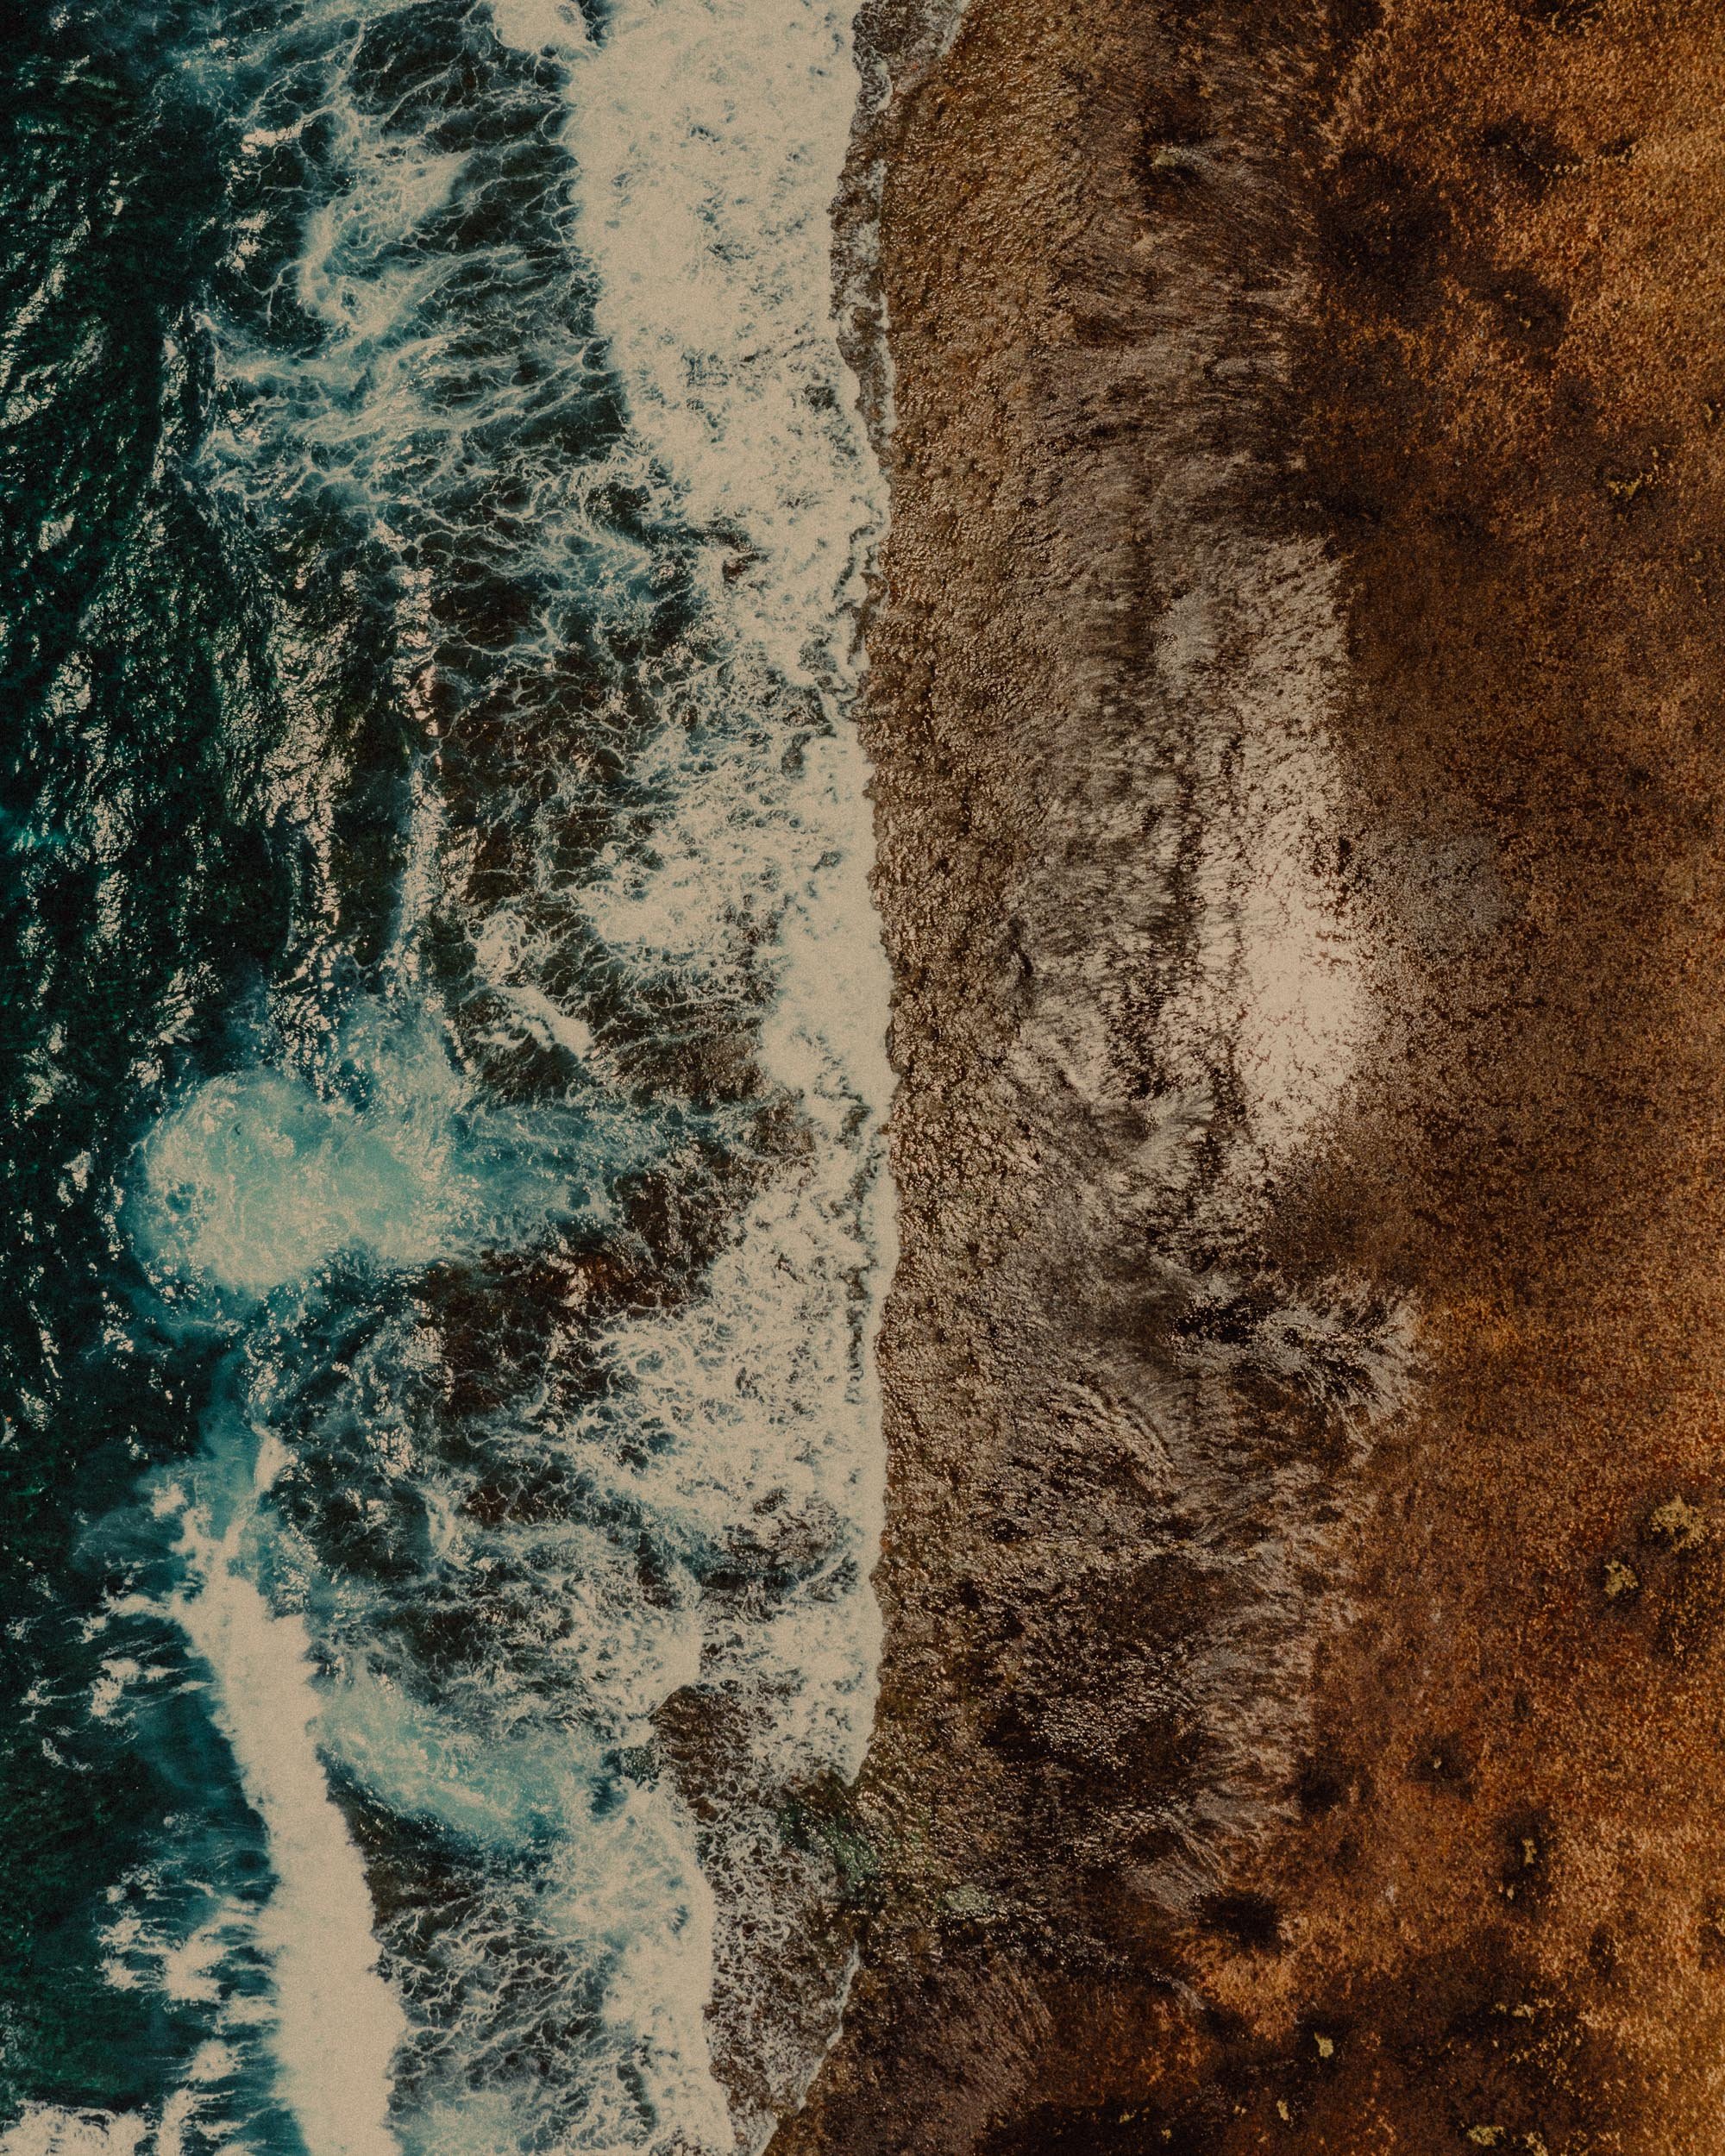 16-Siargao Drone Photography-Crashing waves and a trench, Philippine Sea, Siargao, Philippines, Southeast Asia, April 2022, Mavic 2 Pro, Hasselblad L1D-20c.jpg